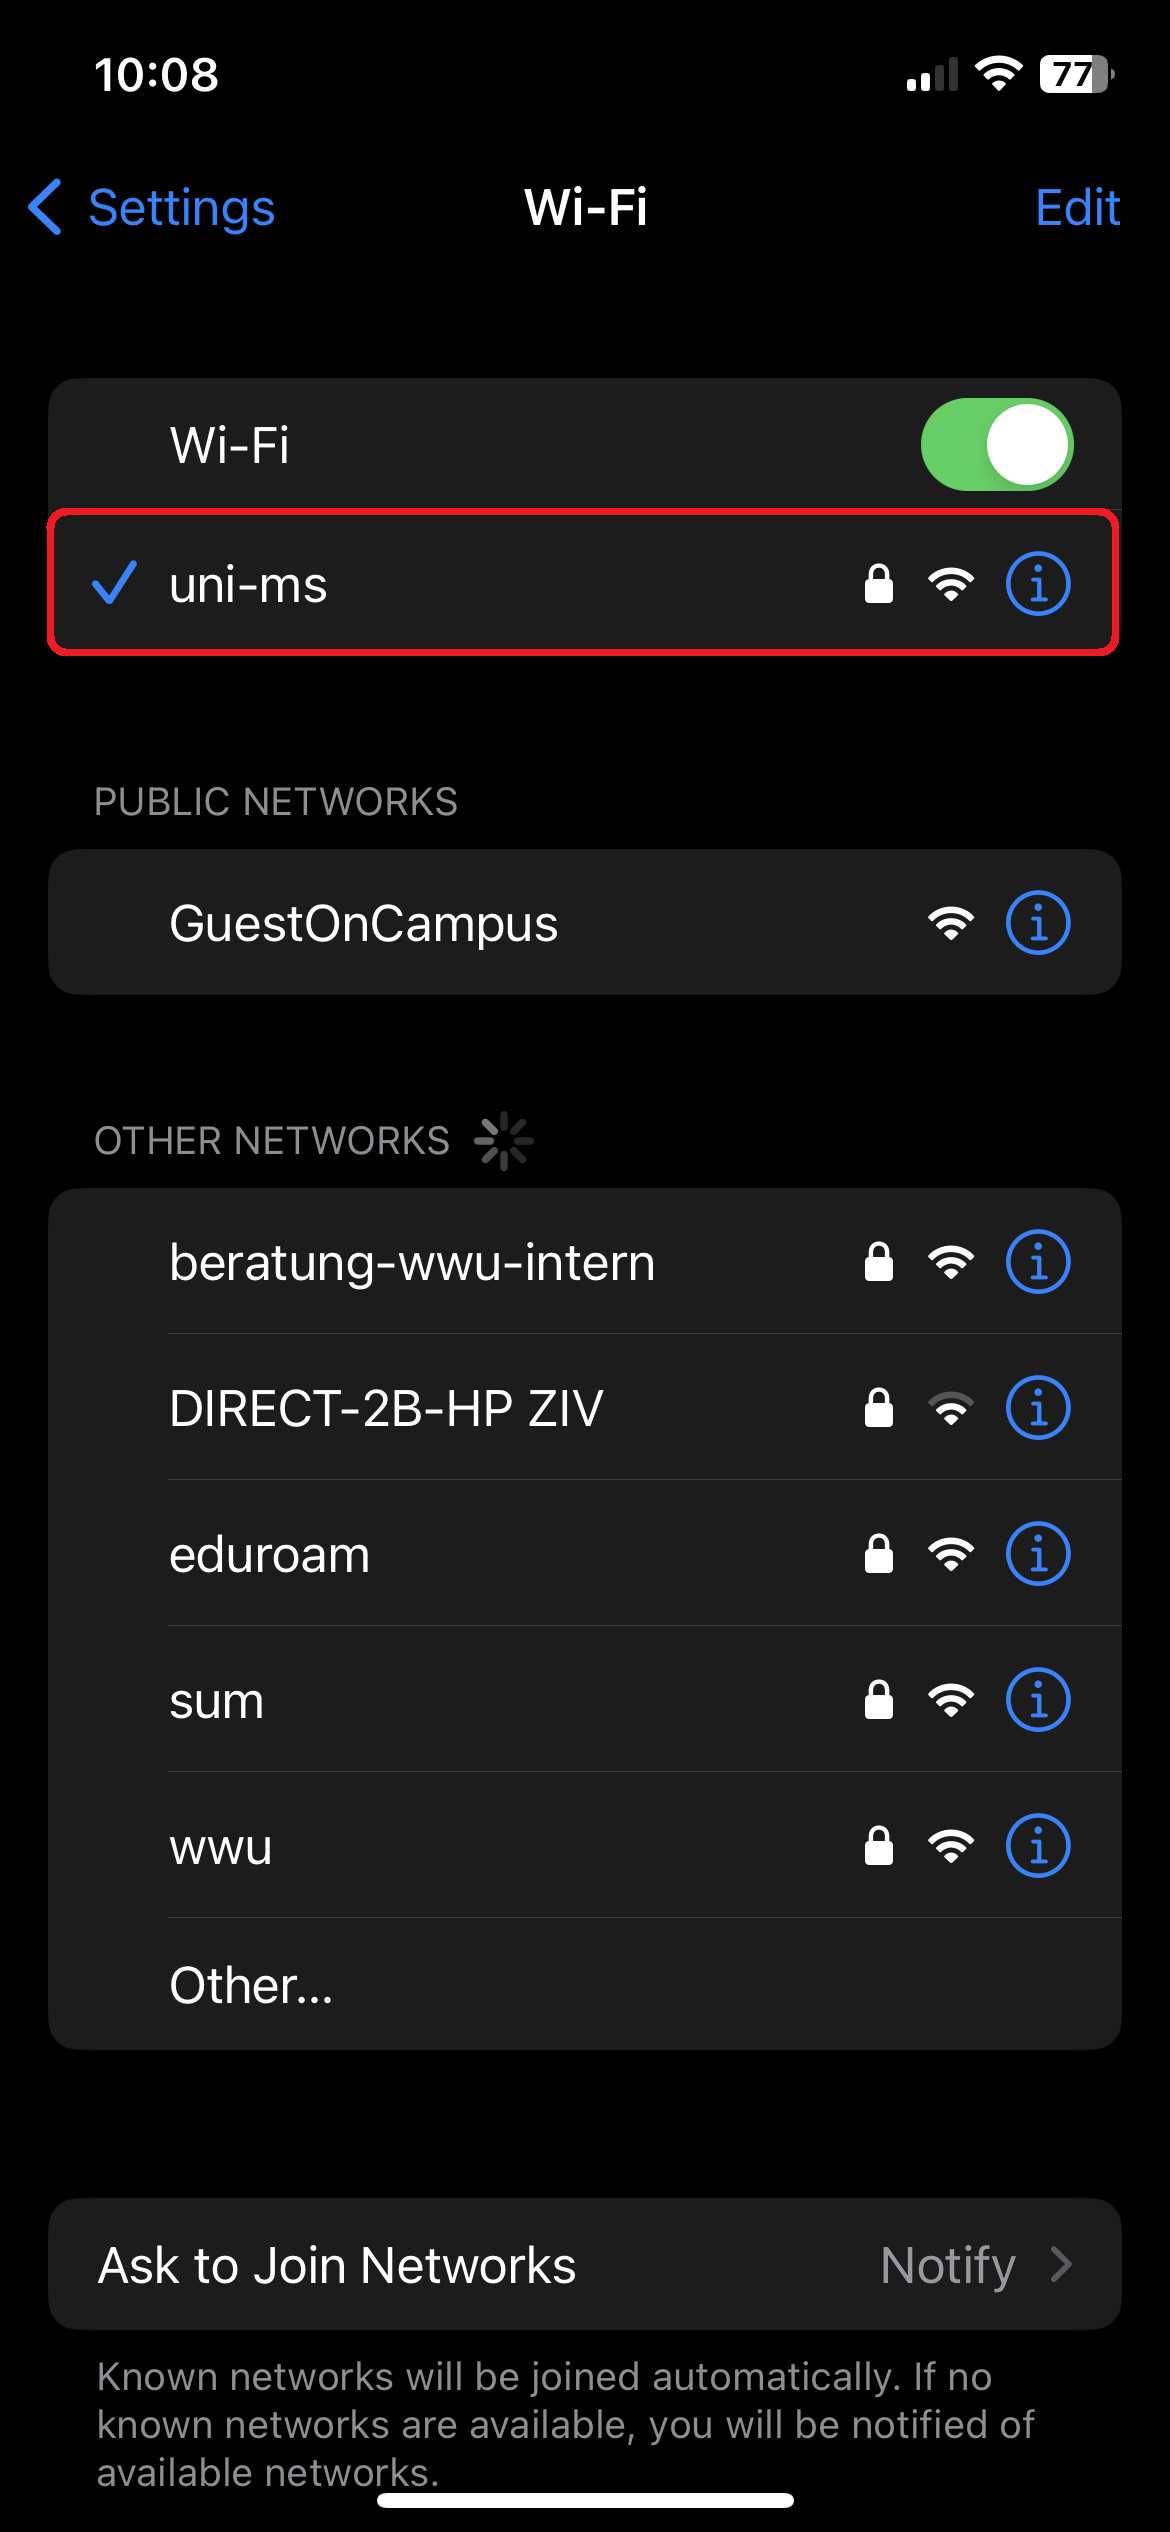 12. WiFi Connection